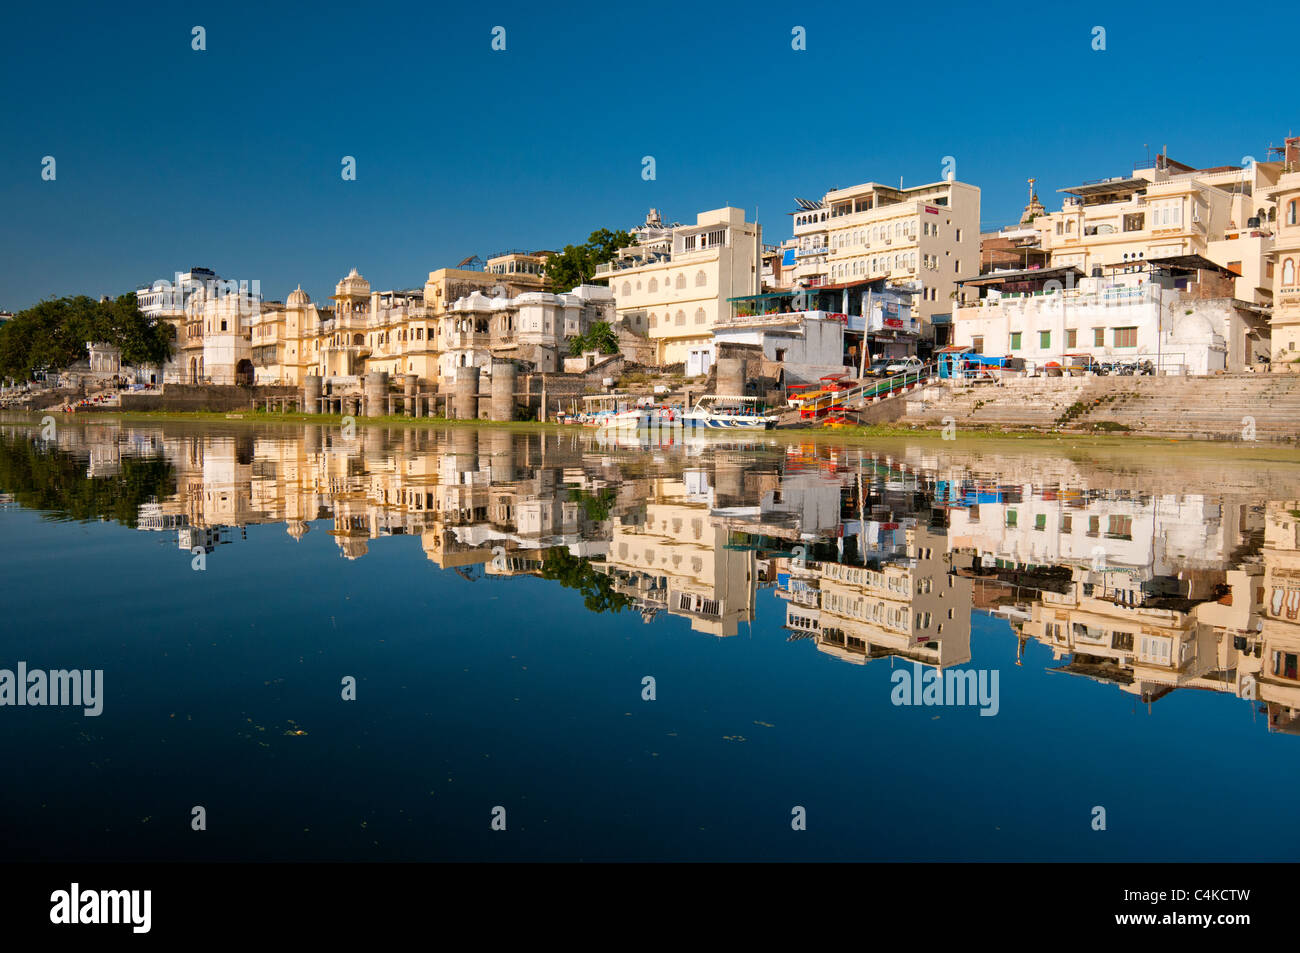 View from Lake Pichola on Udaipur, Rajasthan, India, Asia Stock Photo